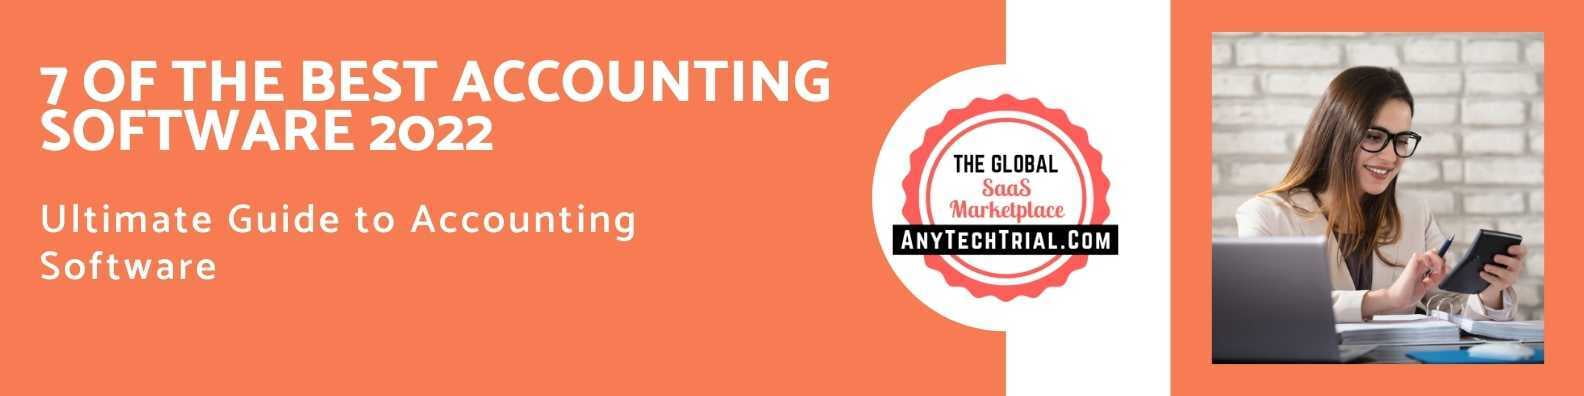 7 Of The Best Accounting Software 2022